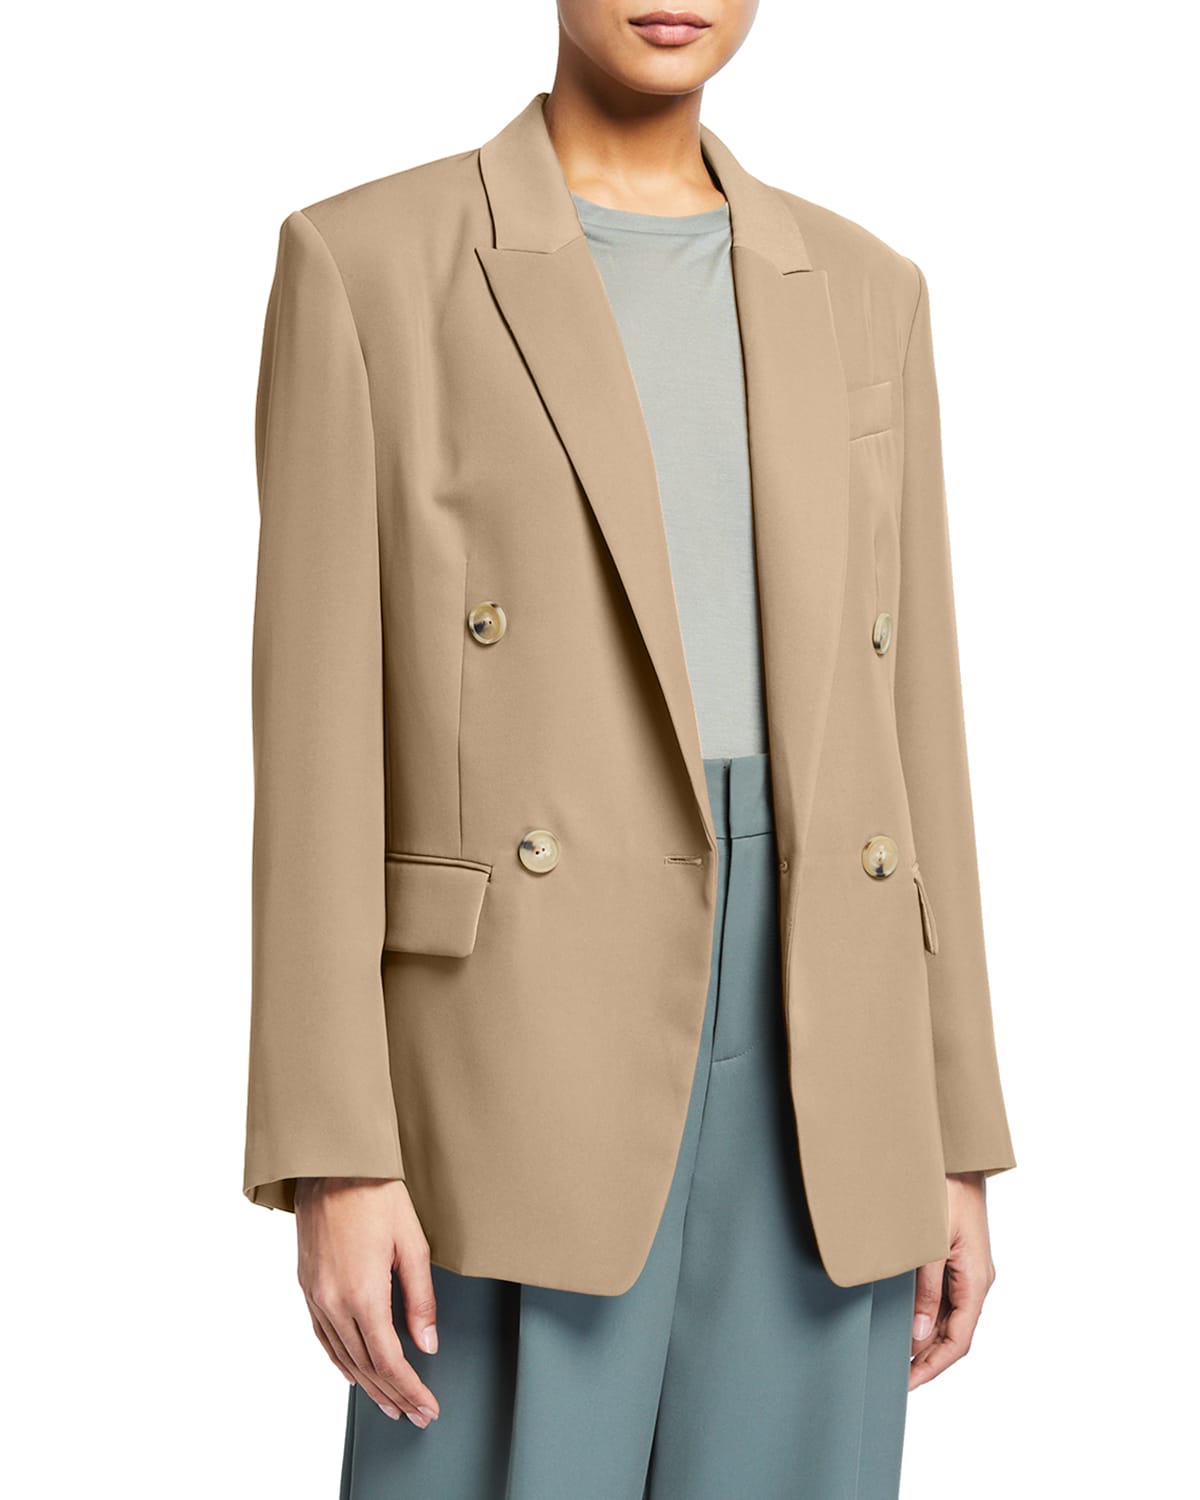 Givenchy Wool-Twill Double-Breasted Boxy Blazer | Neiman Marcus